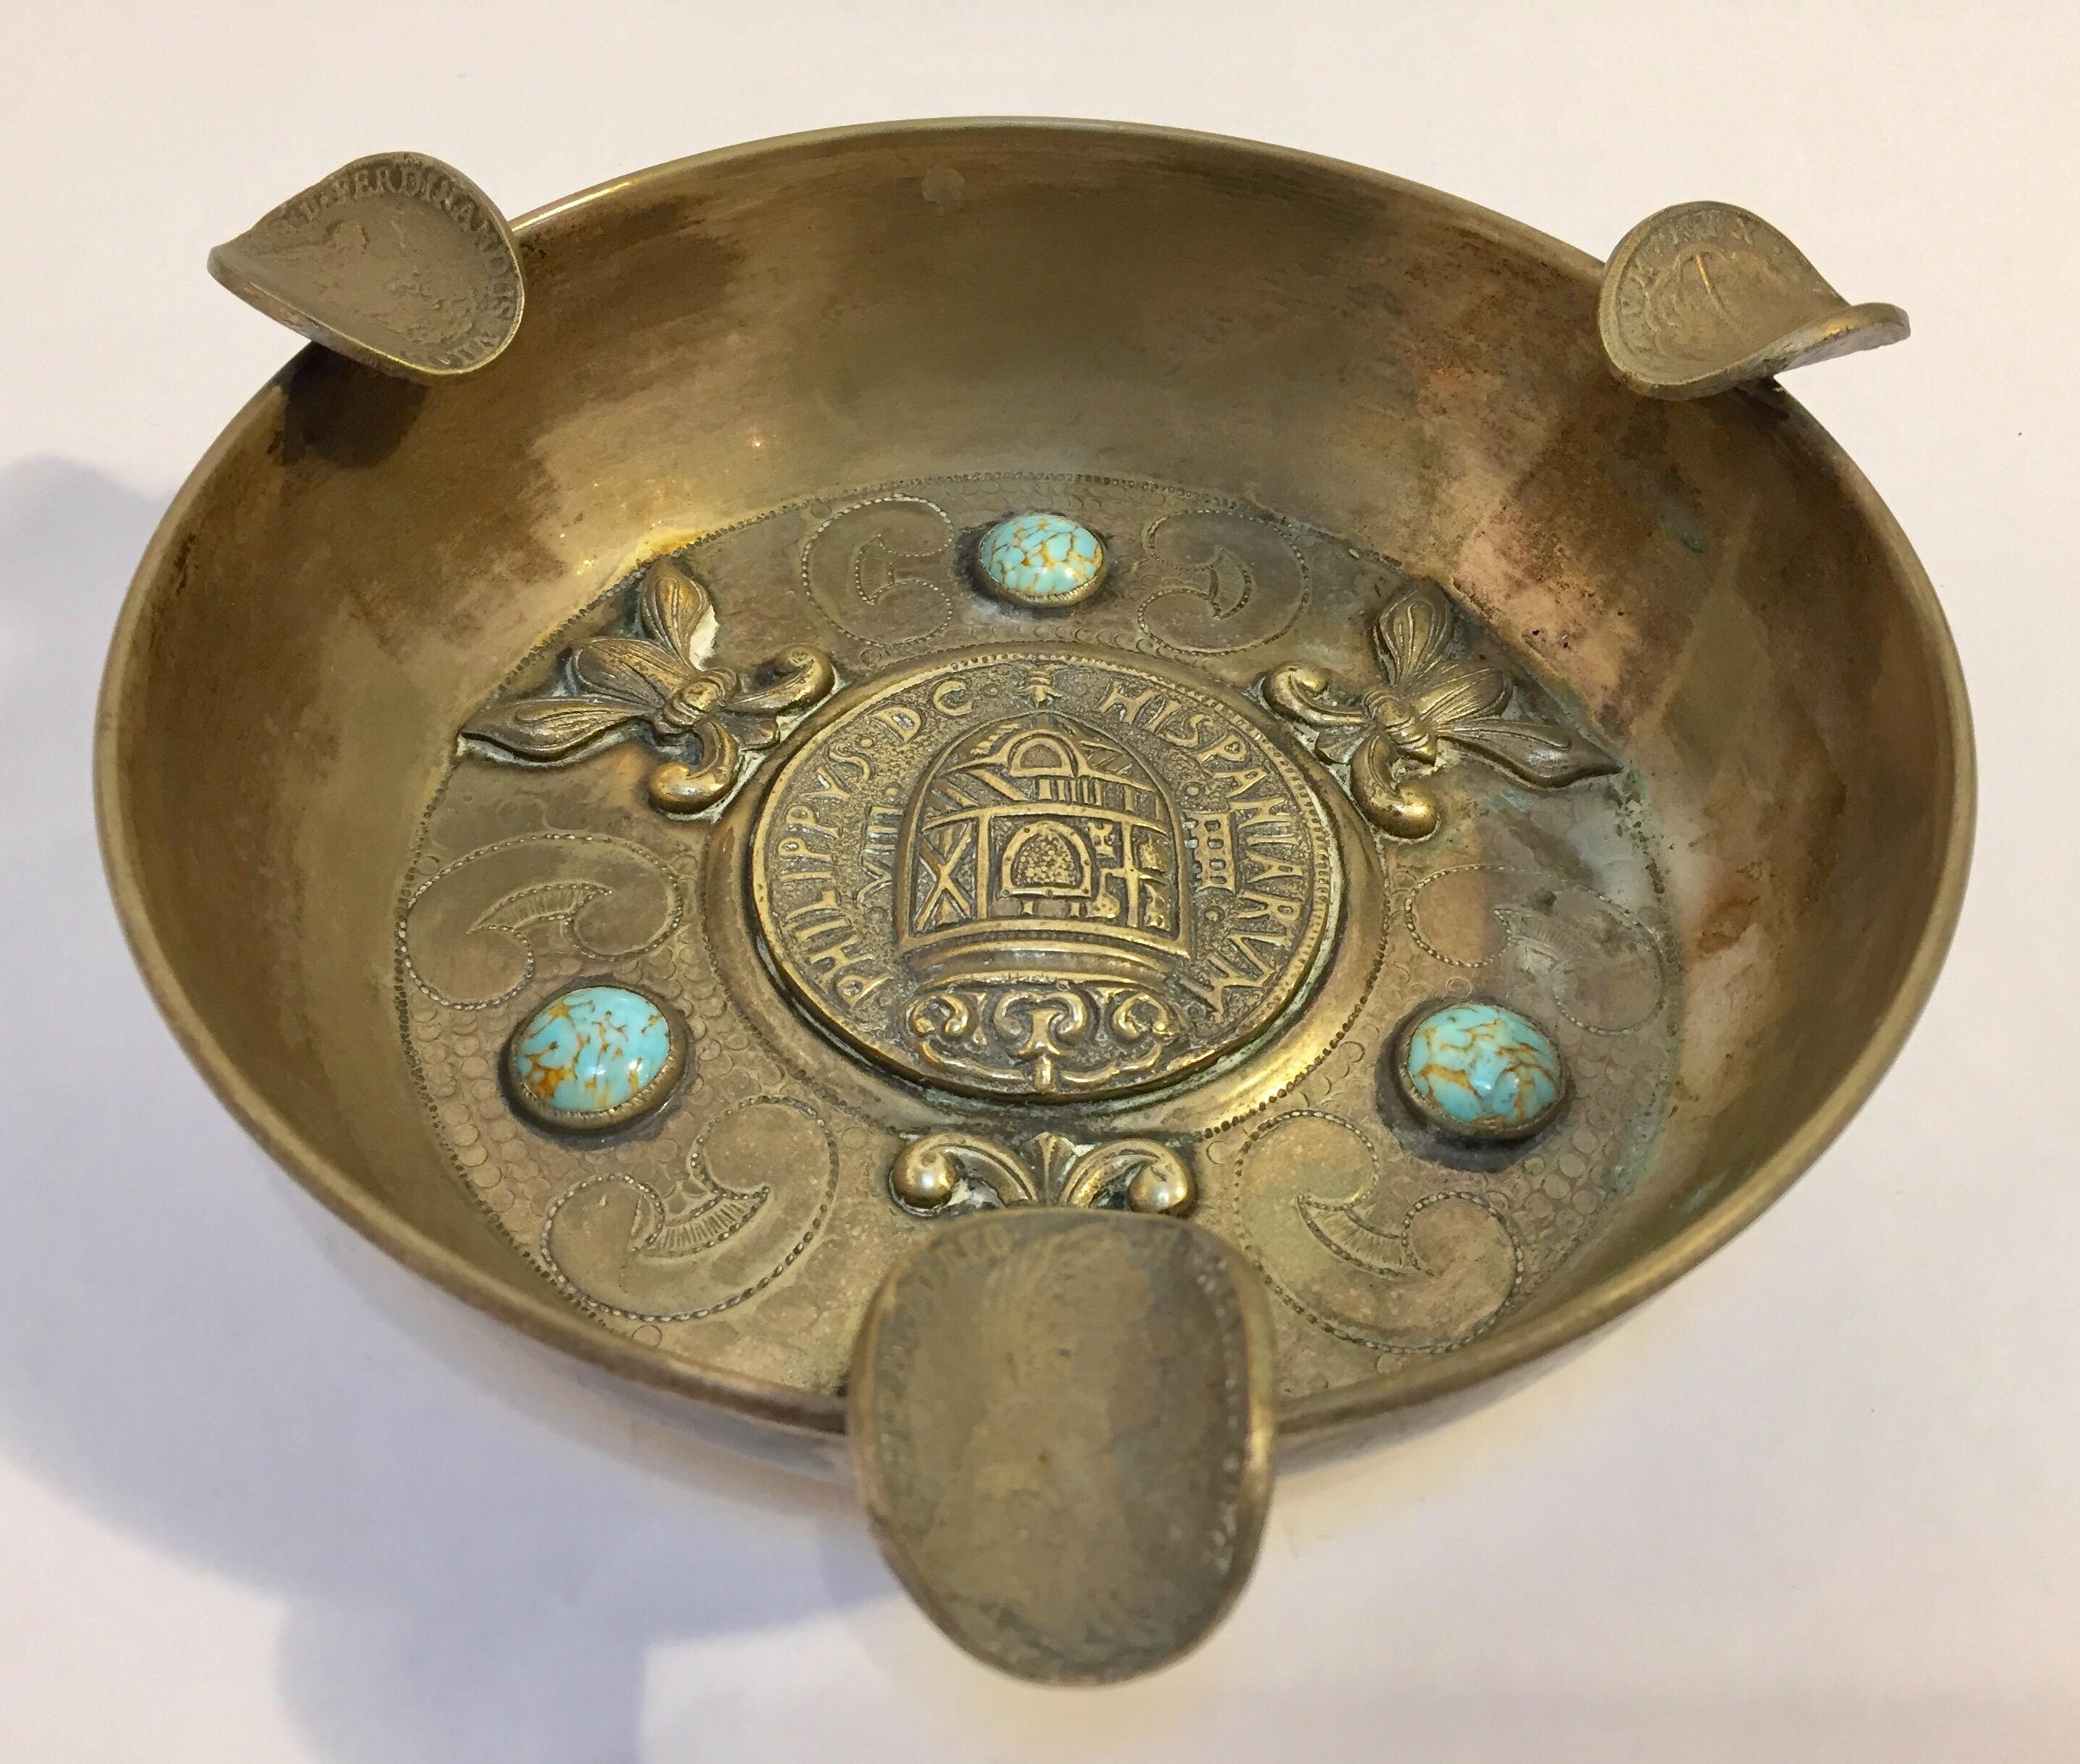 If you're smoking cigars, chances are you enjoy the good things in life. This antique Alpaca coin and turquoise ashtray falls in the category of luxe. 
Handcrafted in South America so each ashtray is totally unique in nature due to the coins